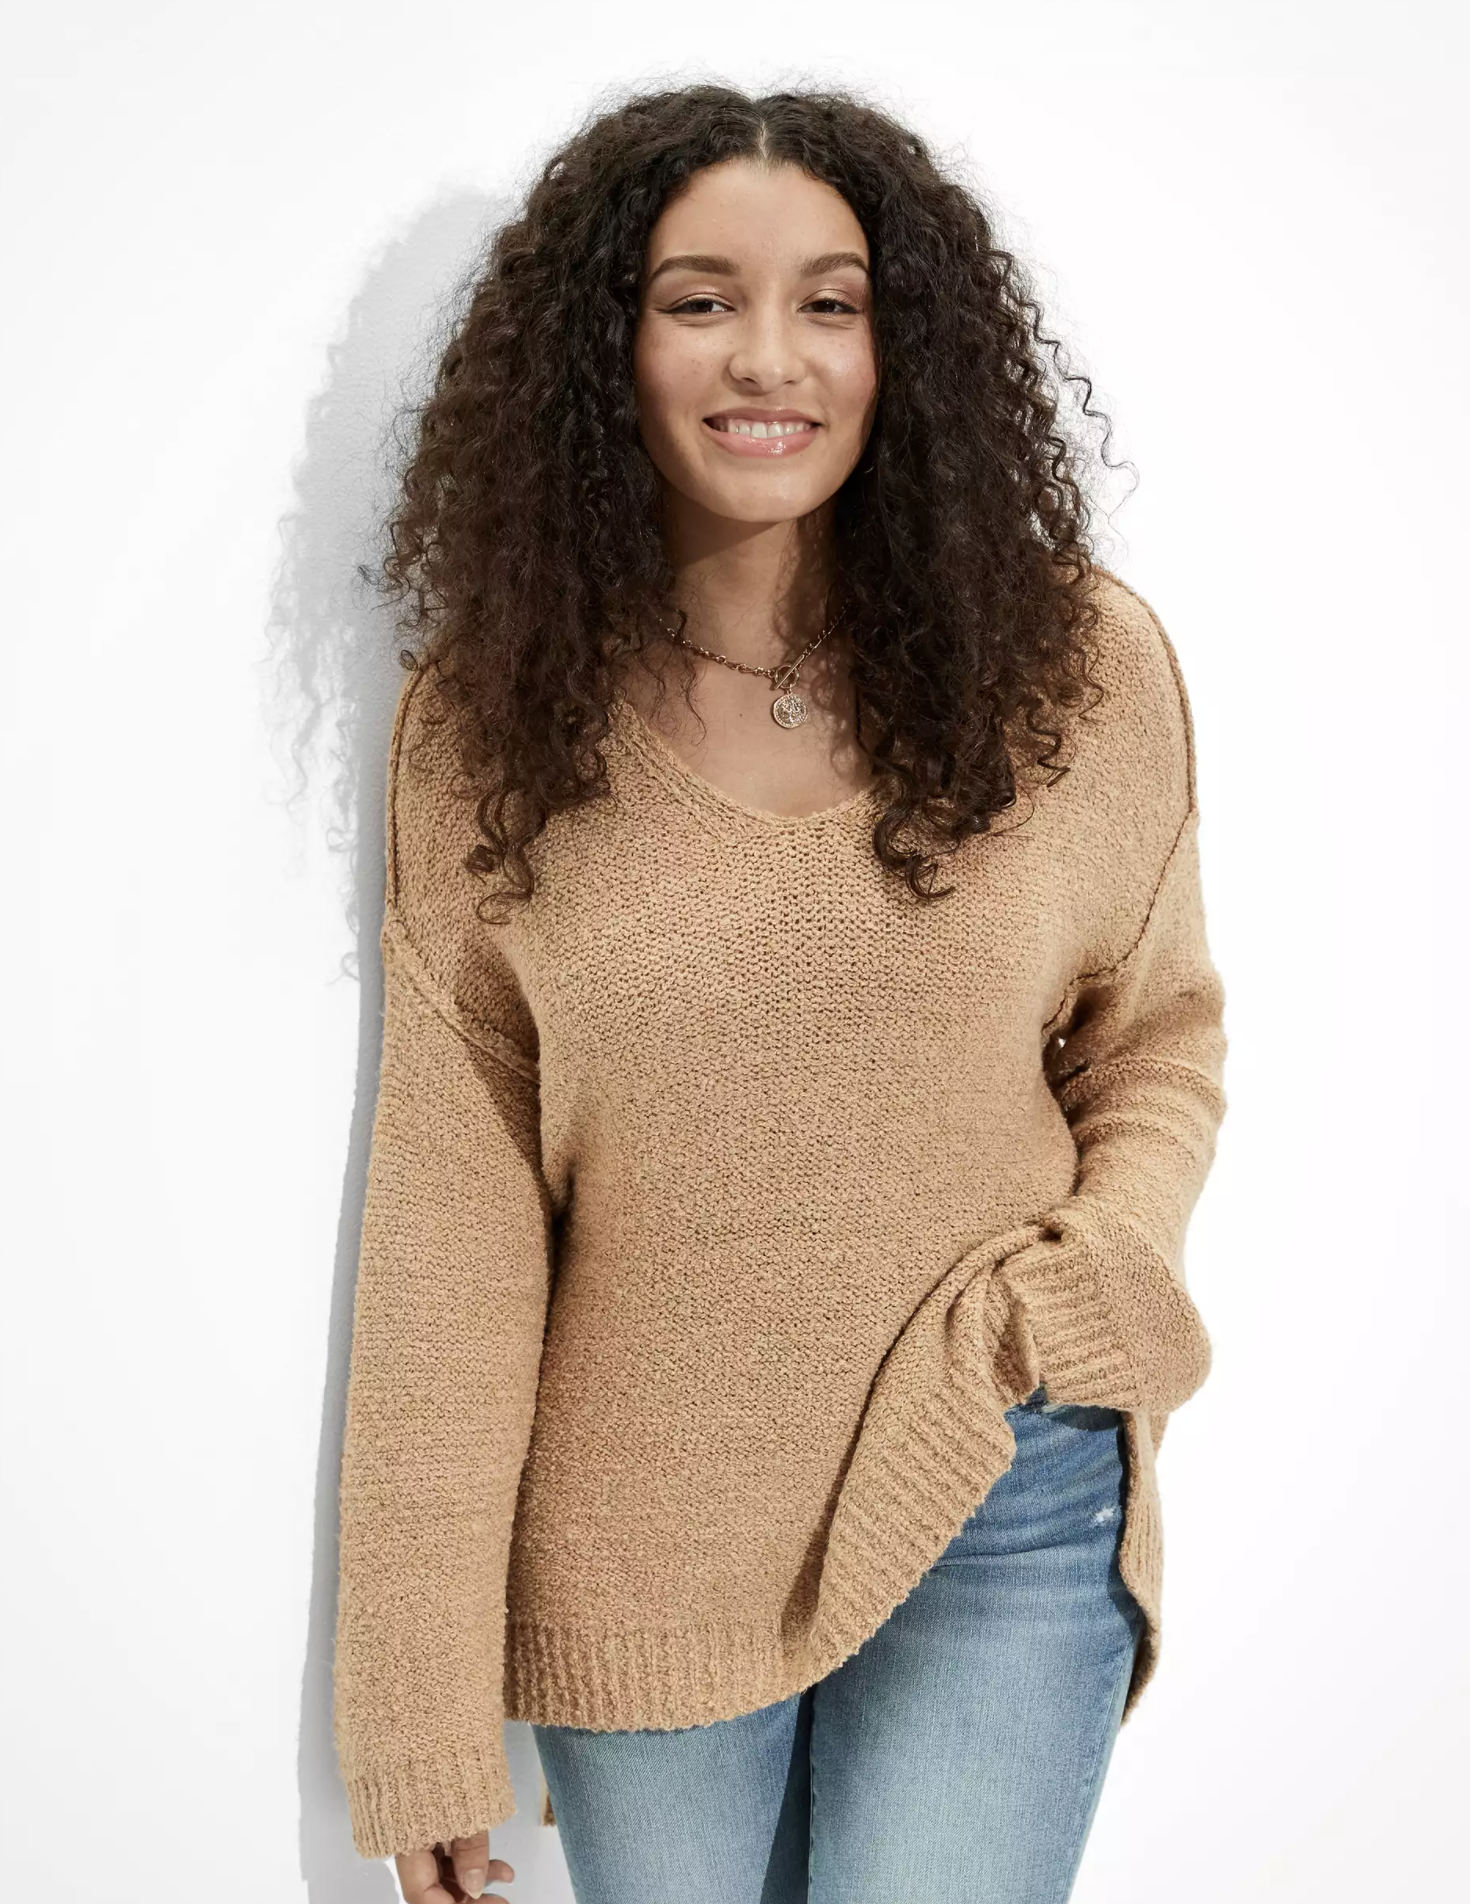 A model wearing the sweater